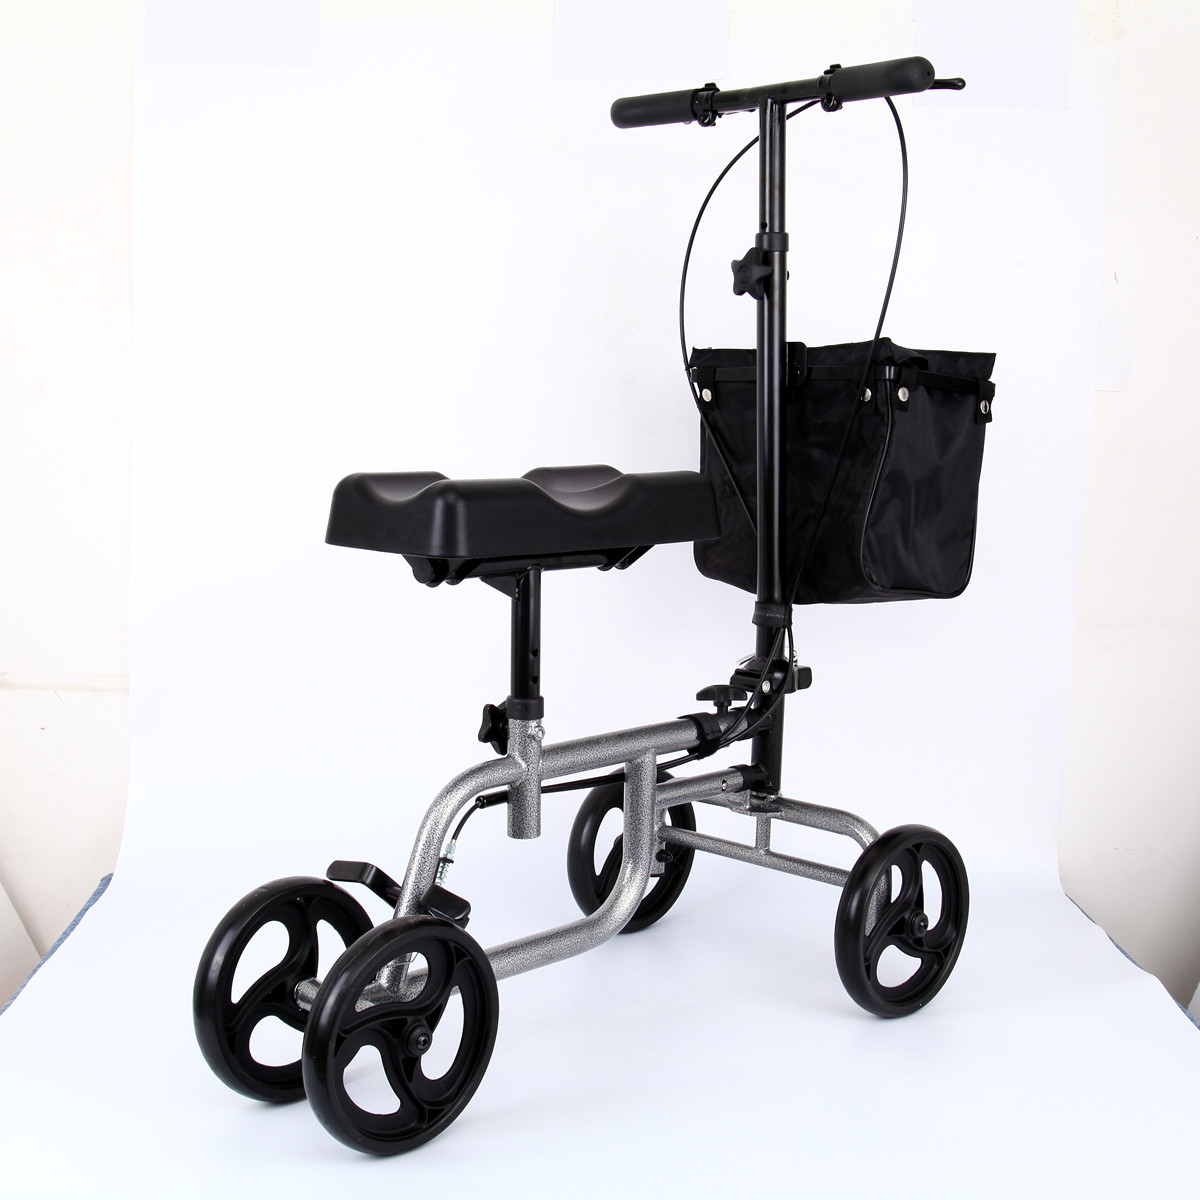 Knee-Walker-Scooter-Foldable-Adjusted-Height-Walking-Aid-Knee-Support-and-Basket-1940439-8